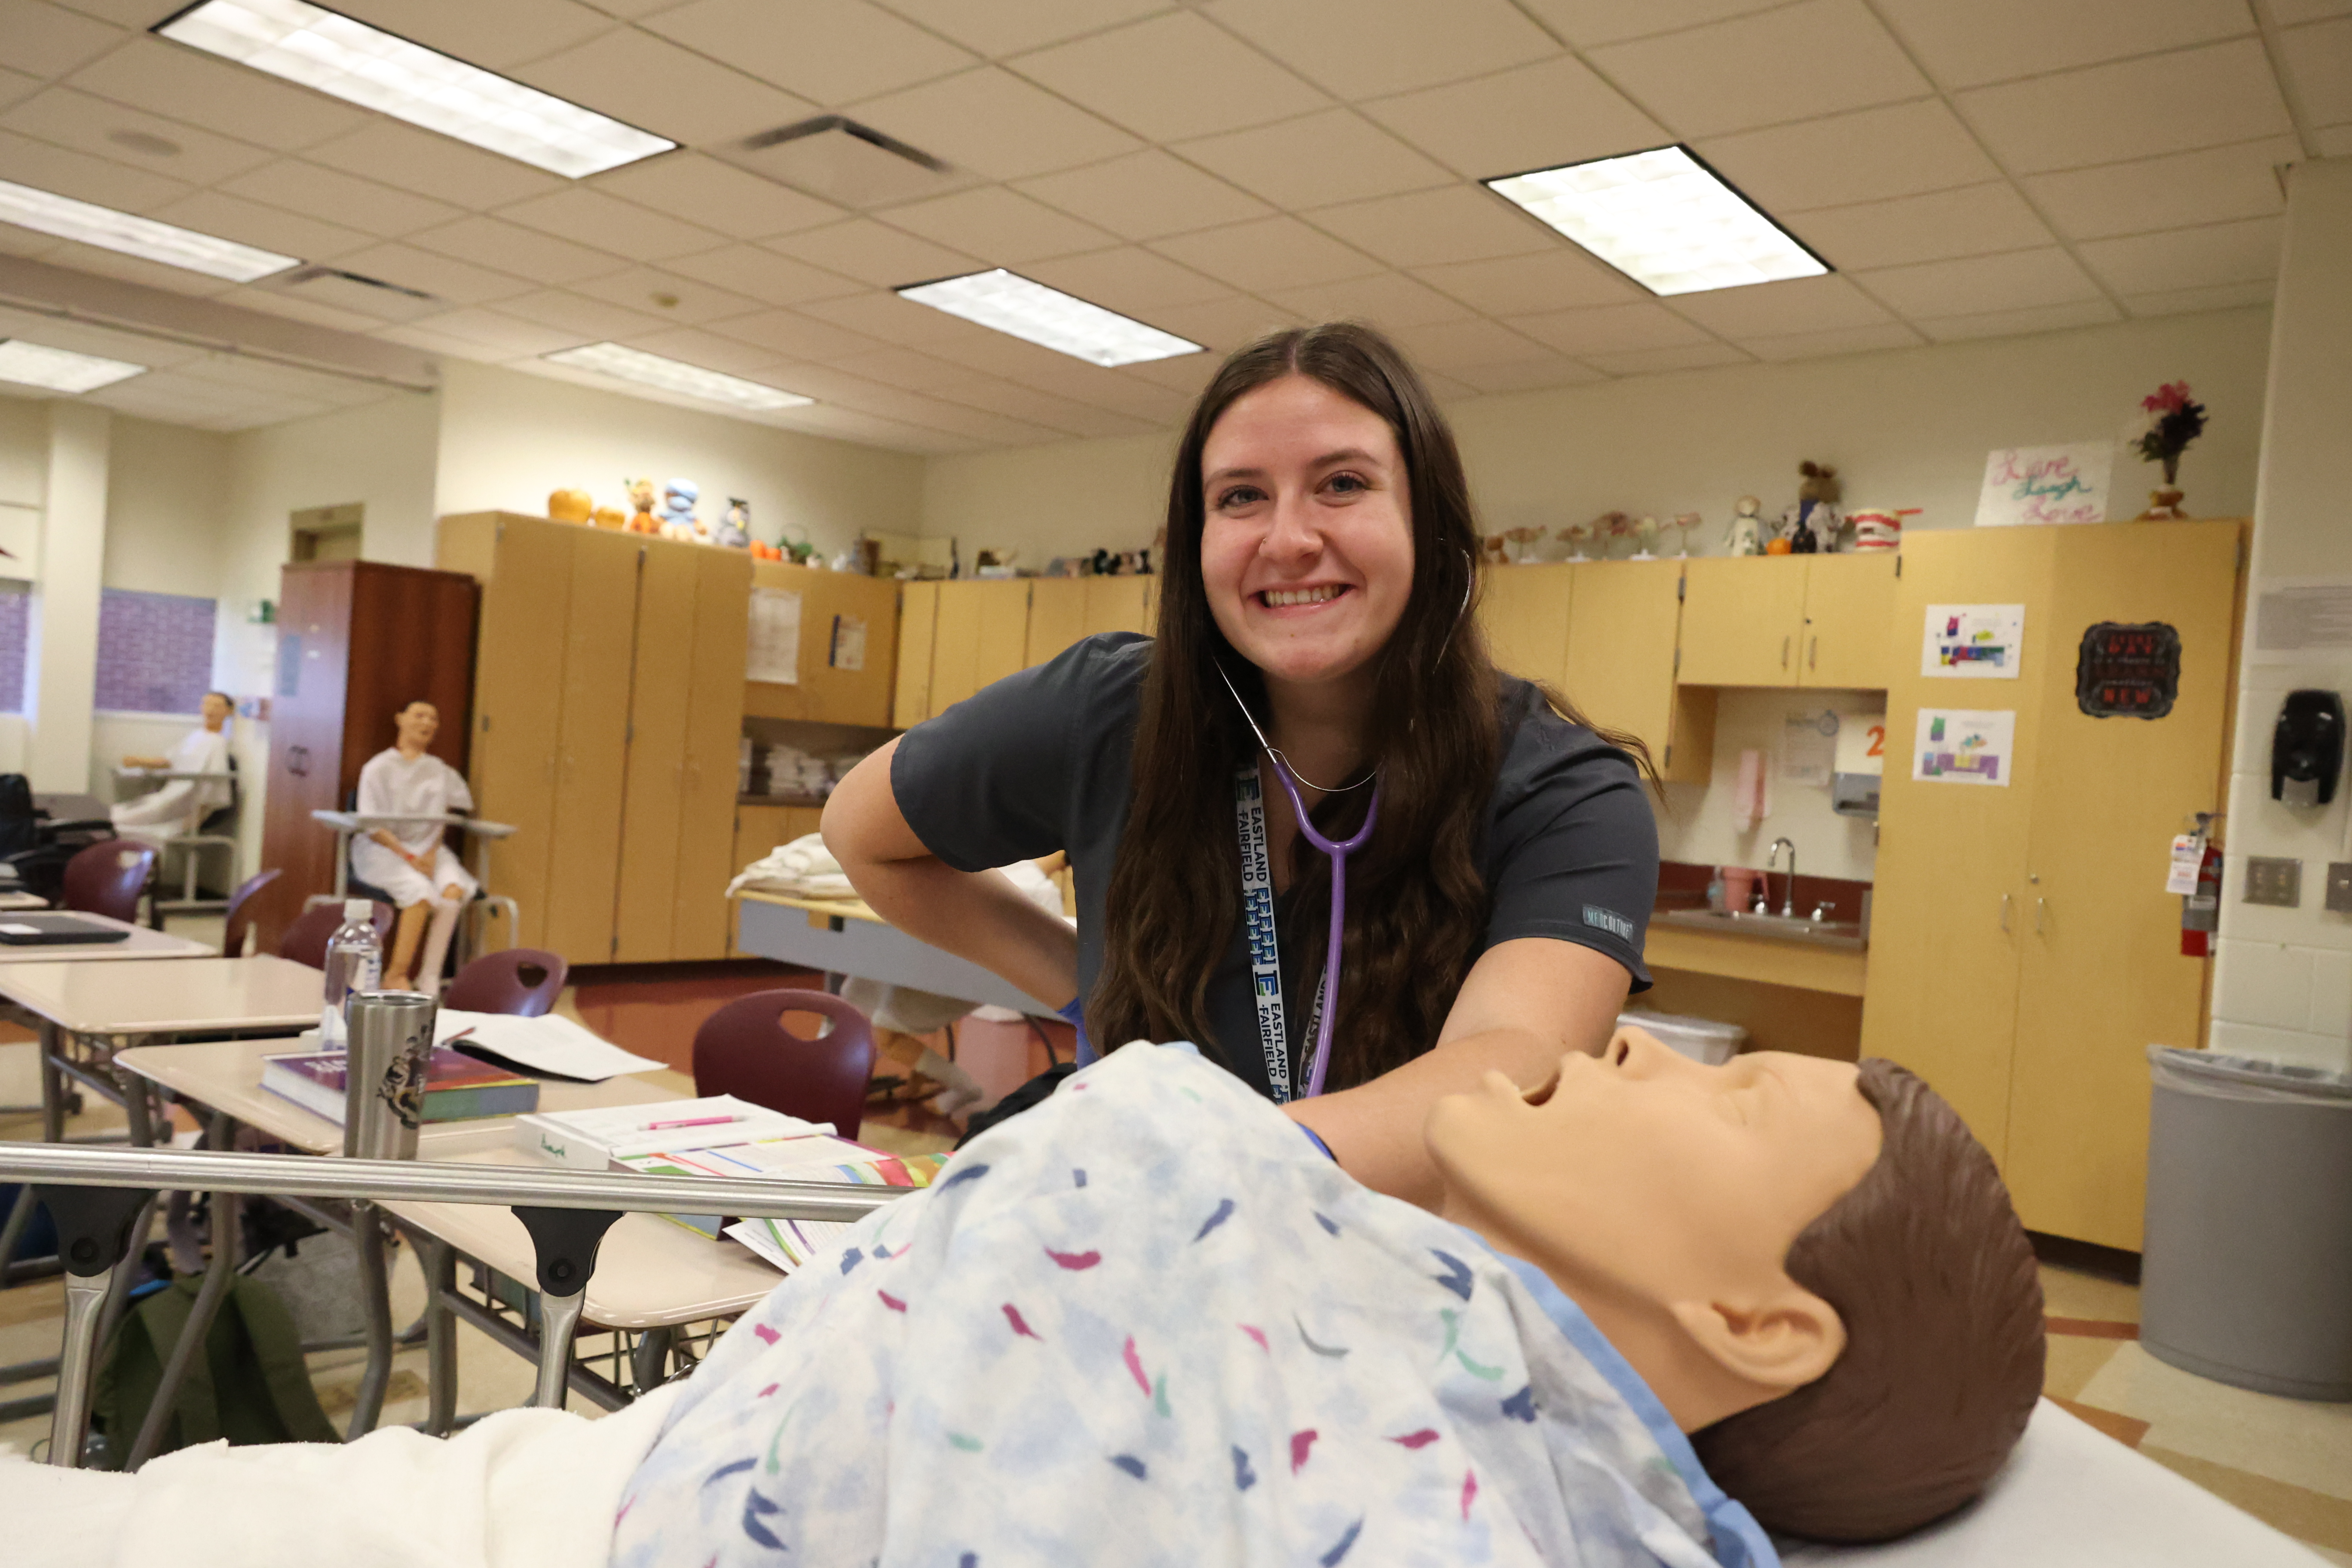 A White, female student measures the heartbeat of a mannequin patient.